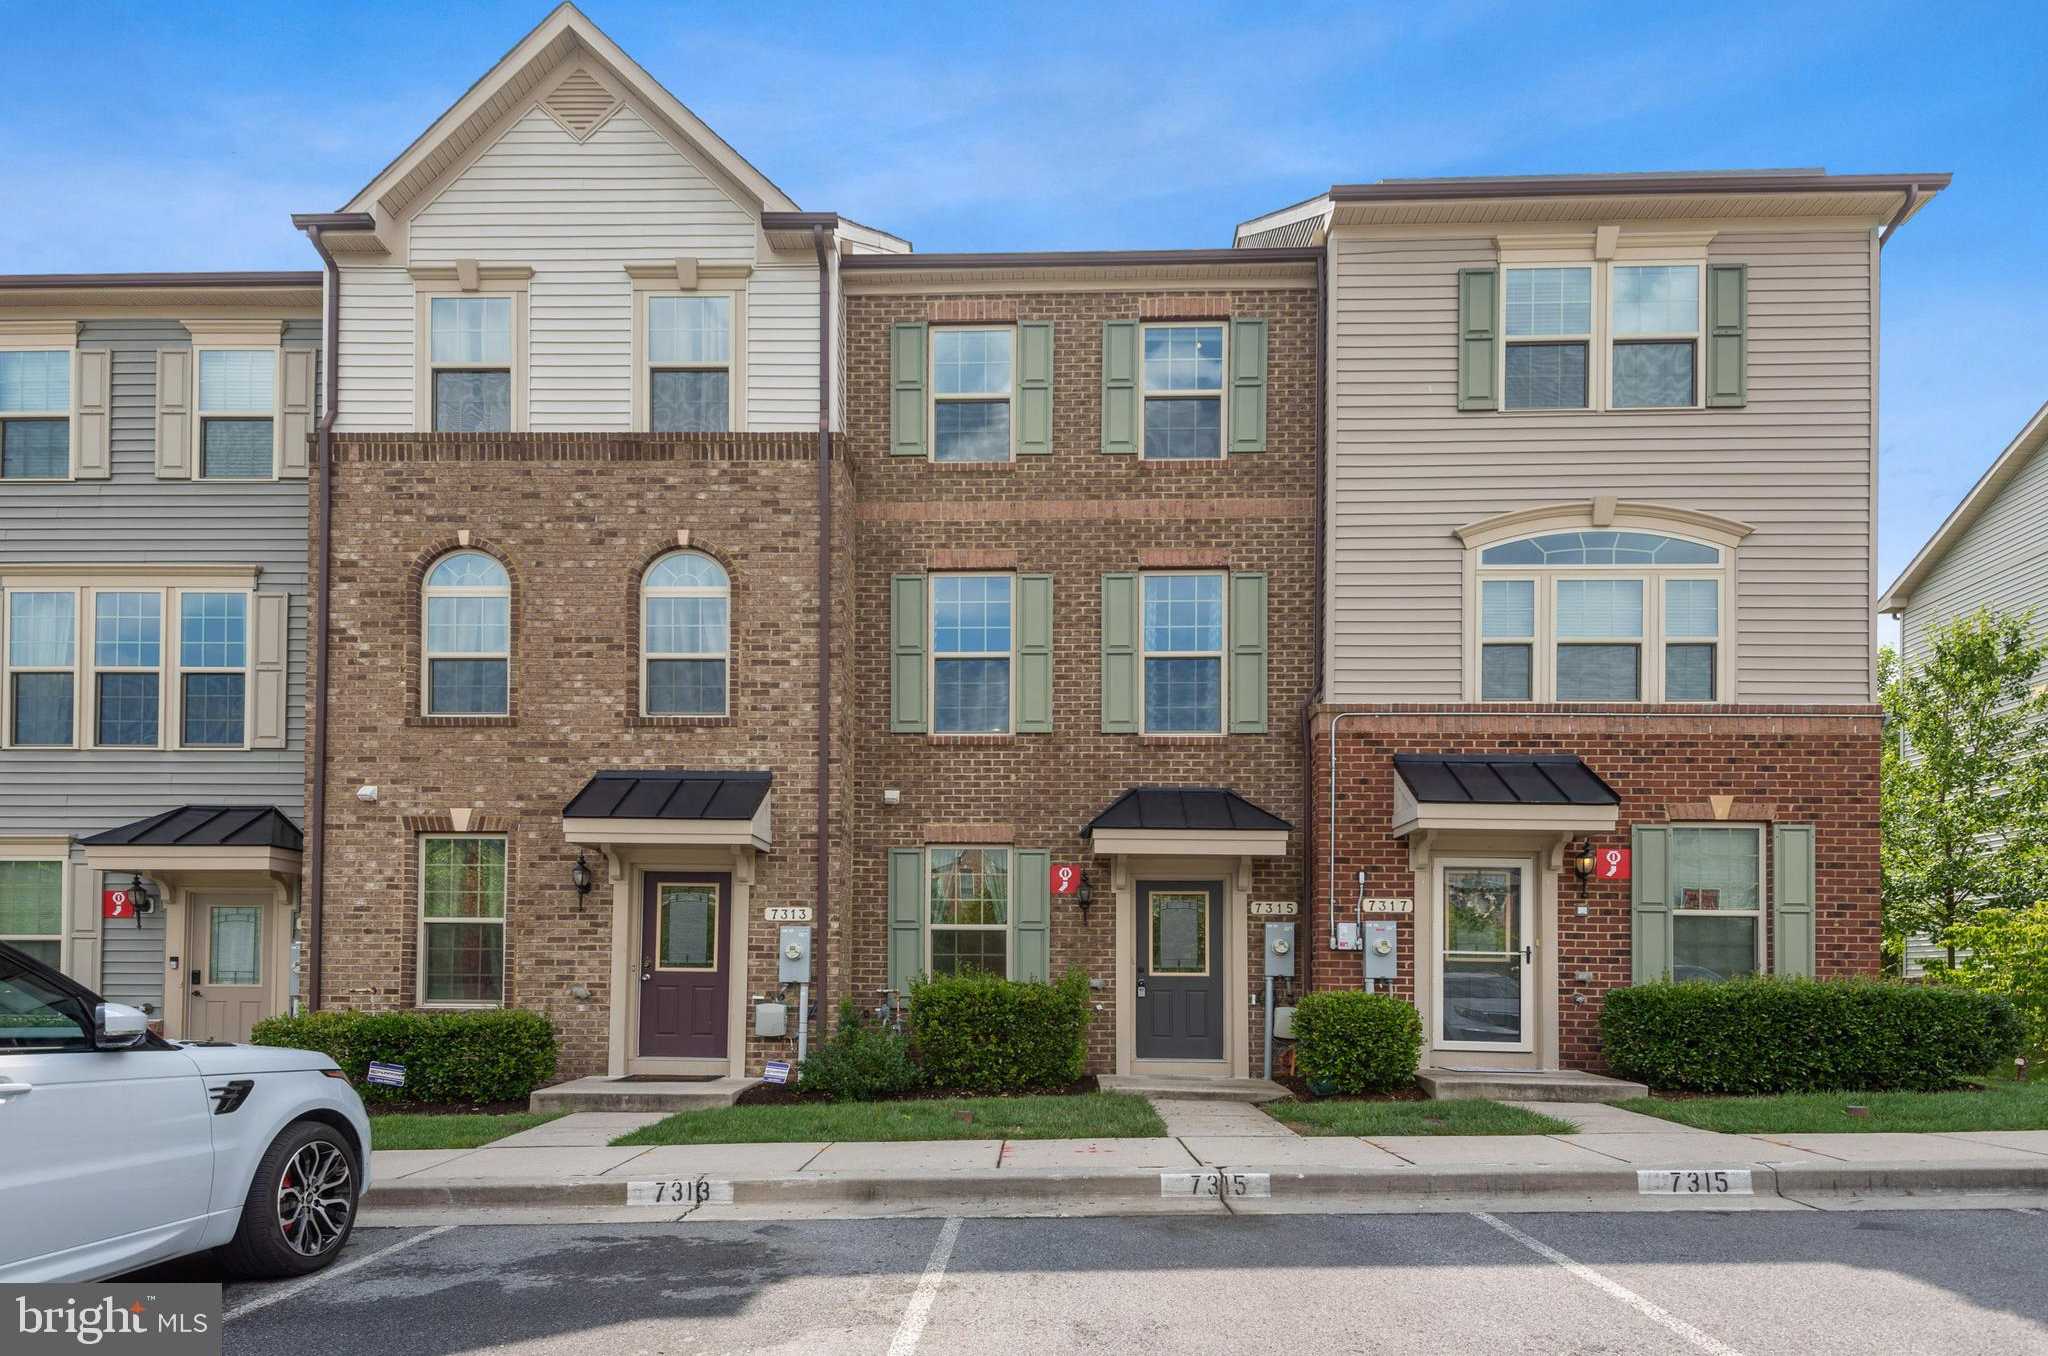 View HANOVER, MD 21076 townhome